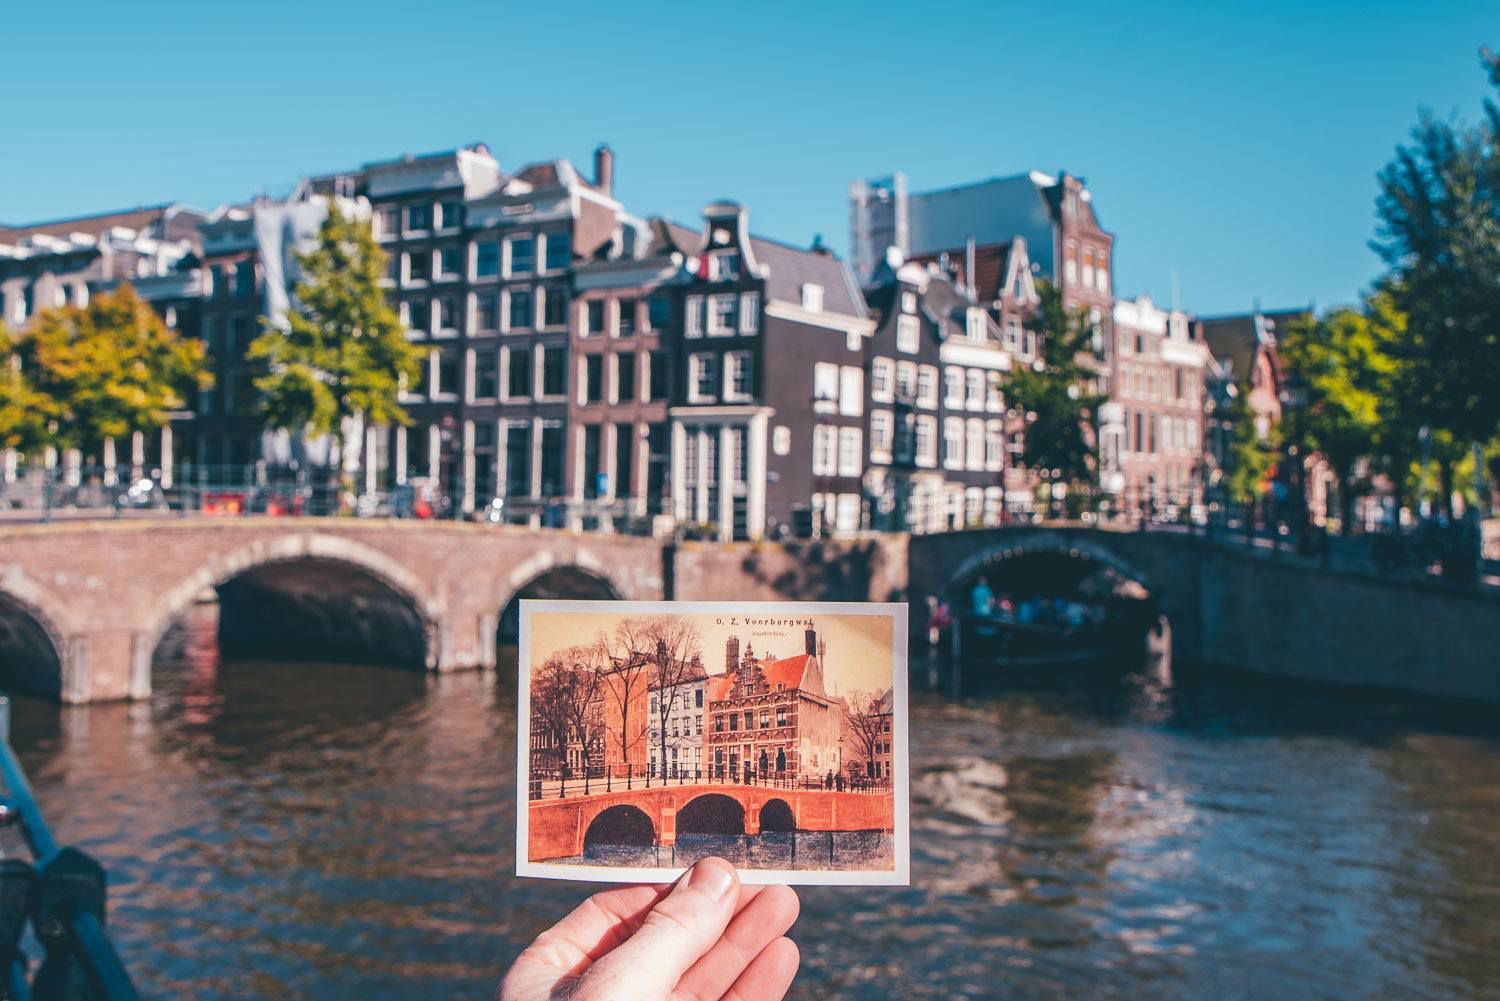 Facts about Amsterdam